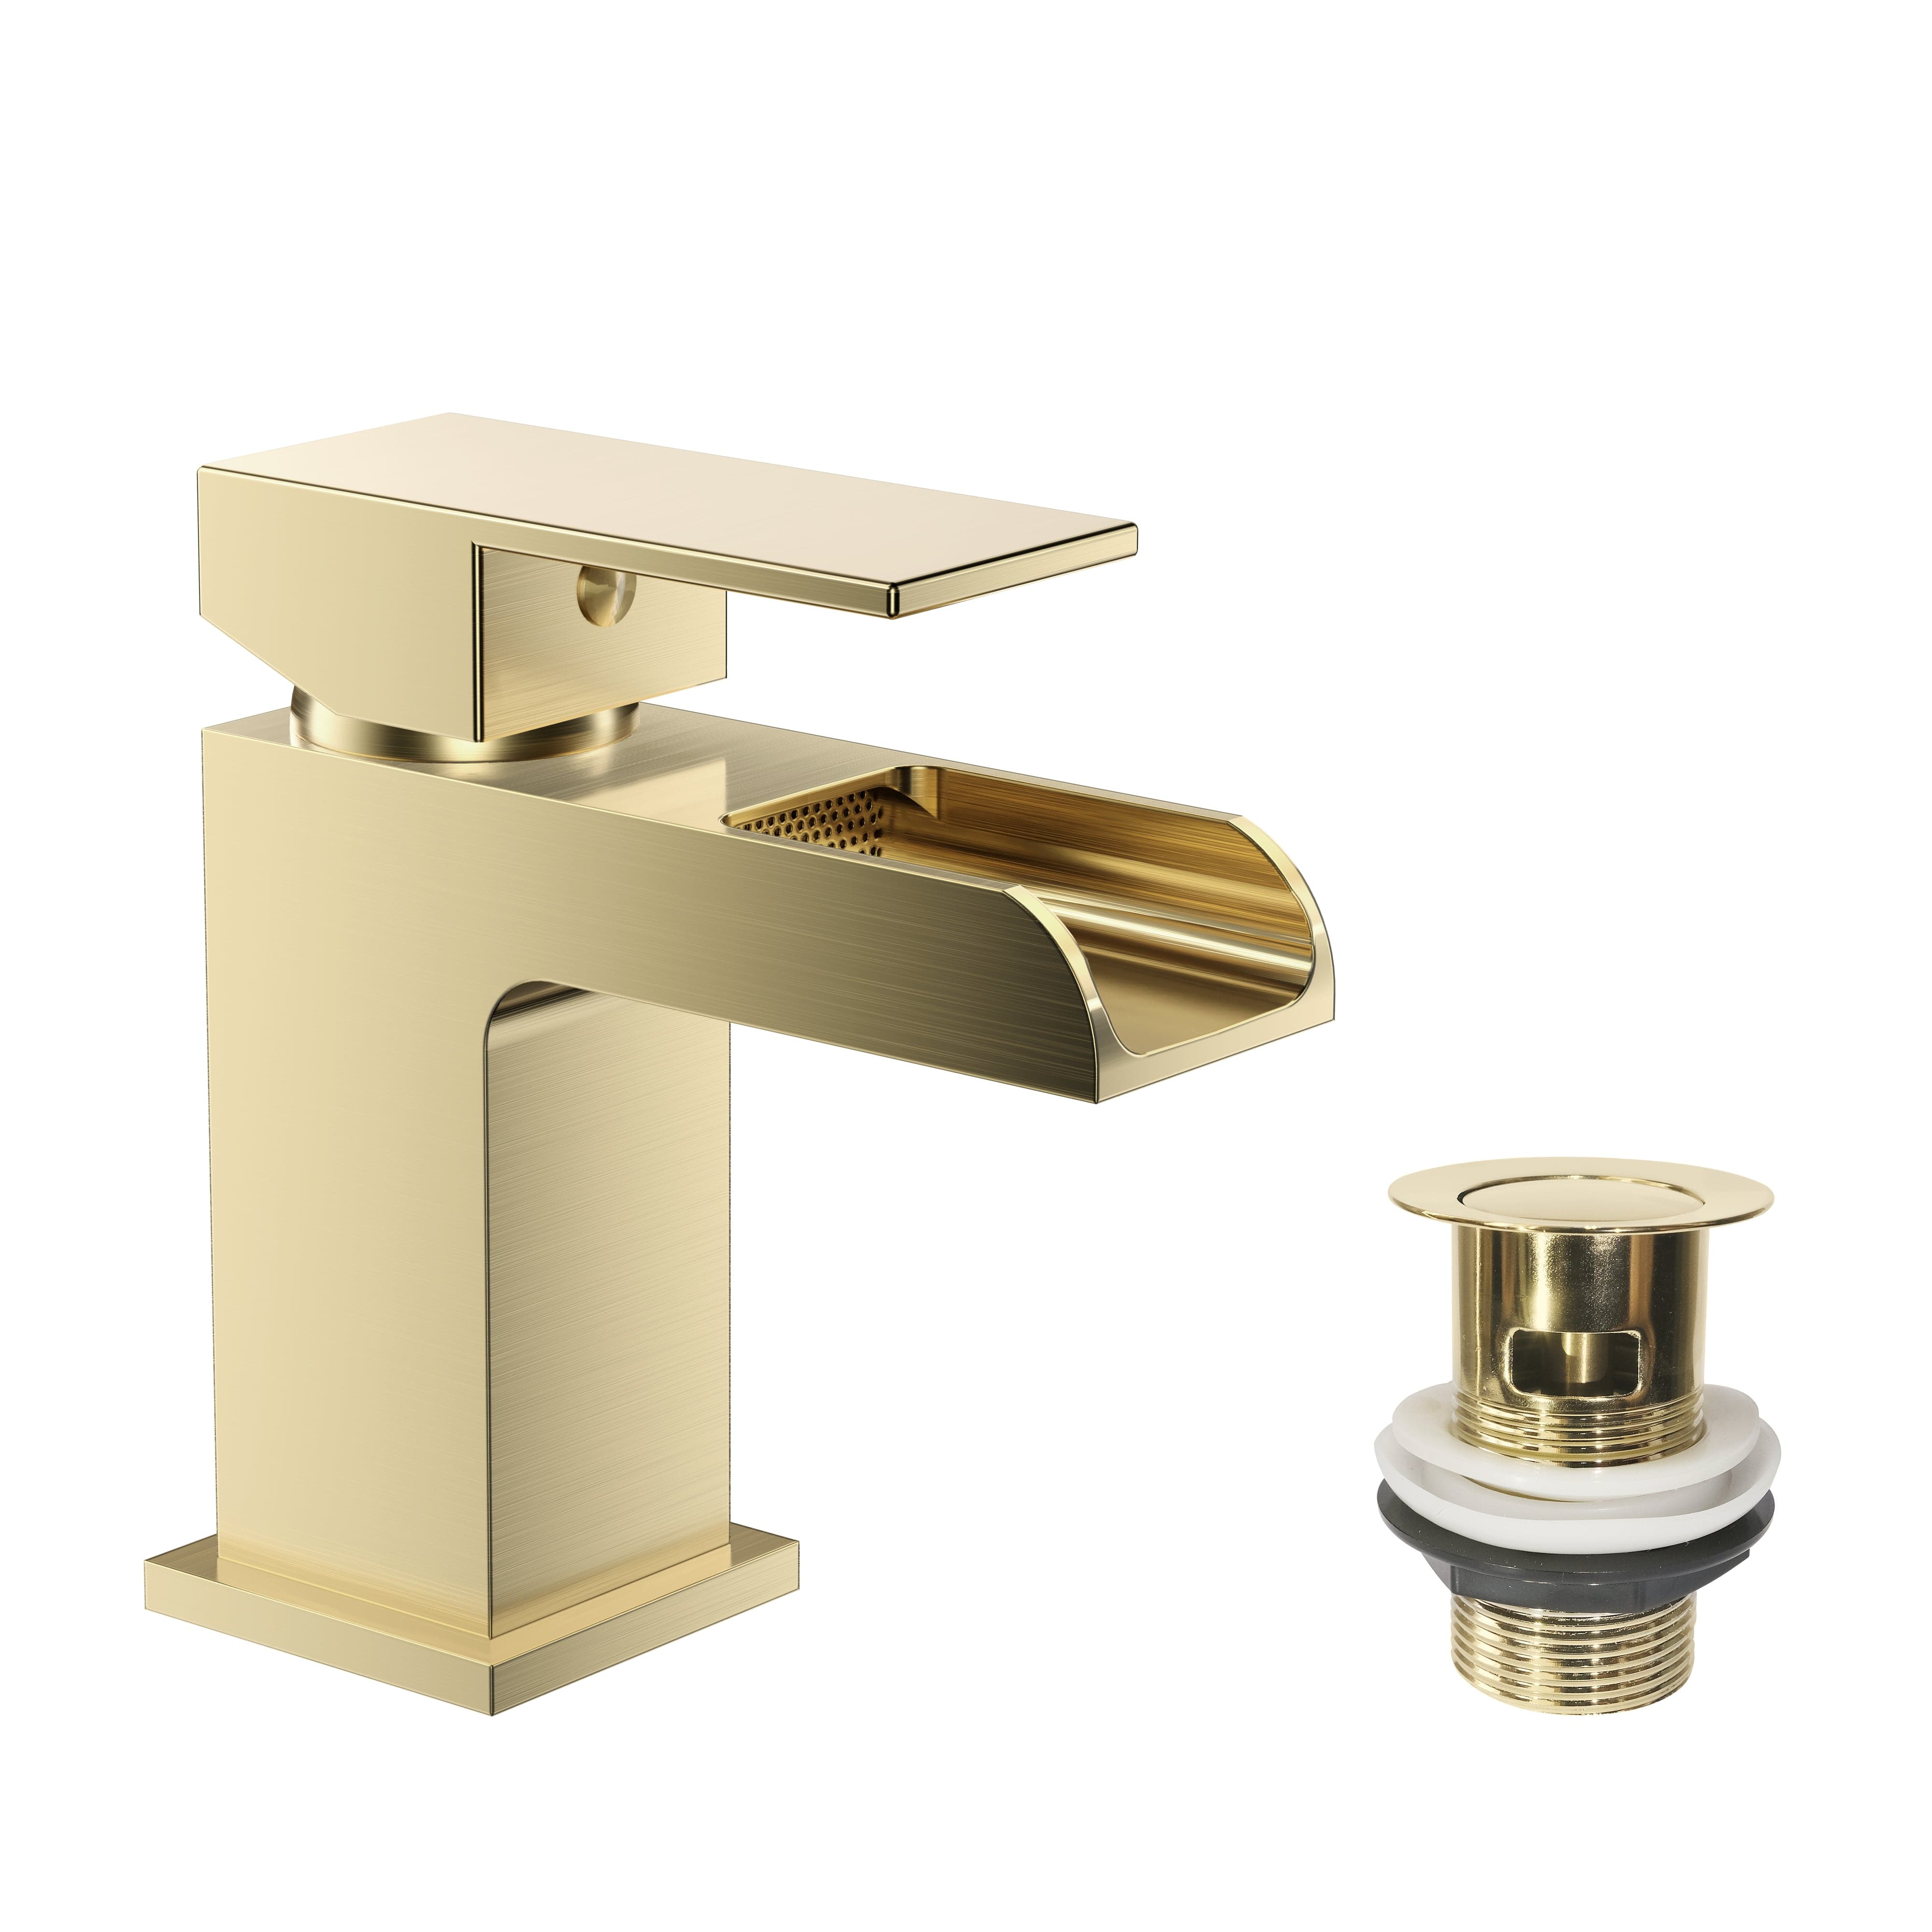 Kelvin Square Waterfall Mono Basin Mixer Tap with Waste - Brushed Brass